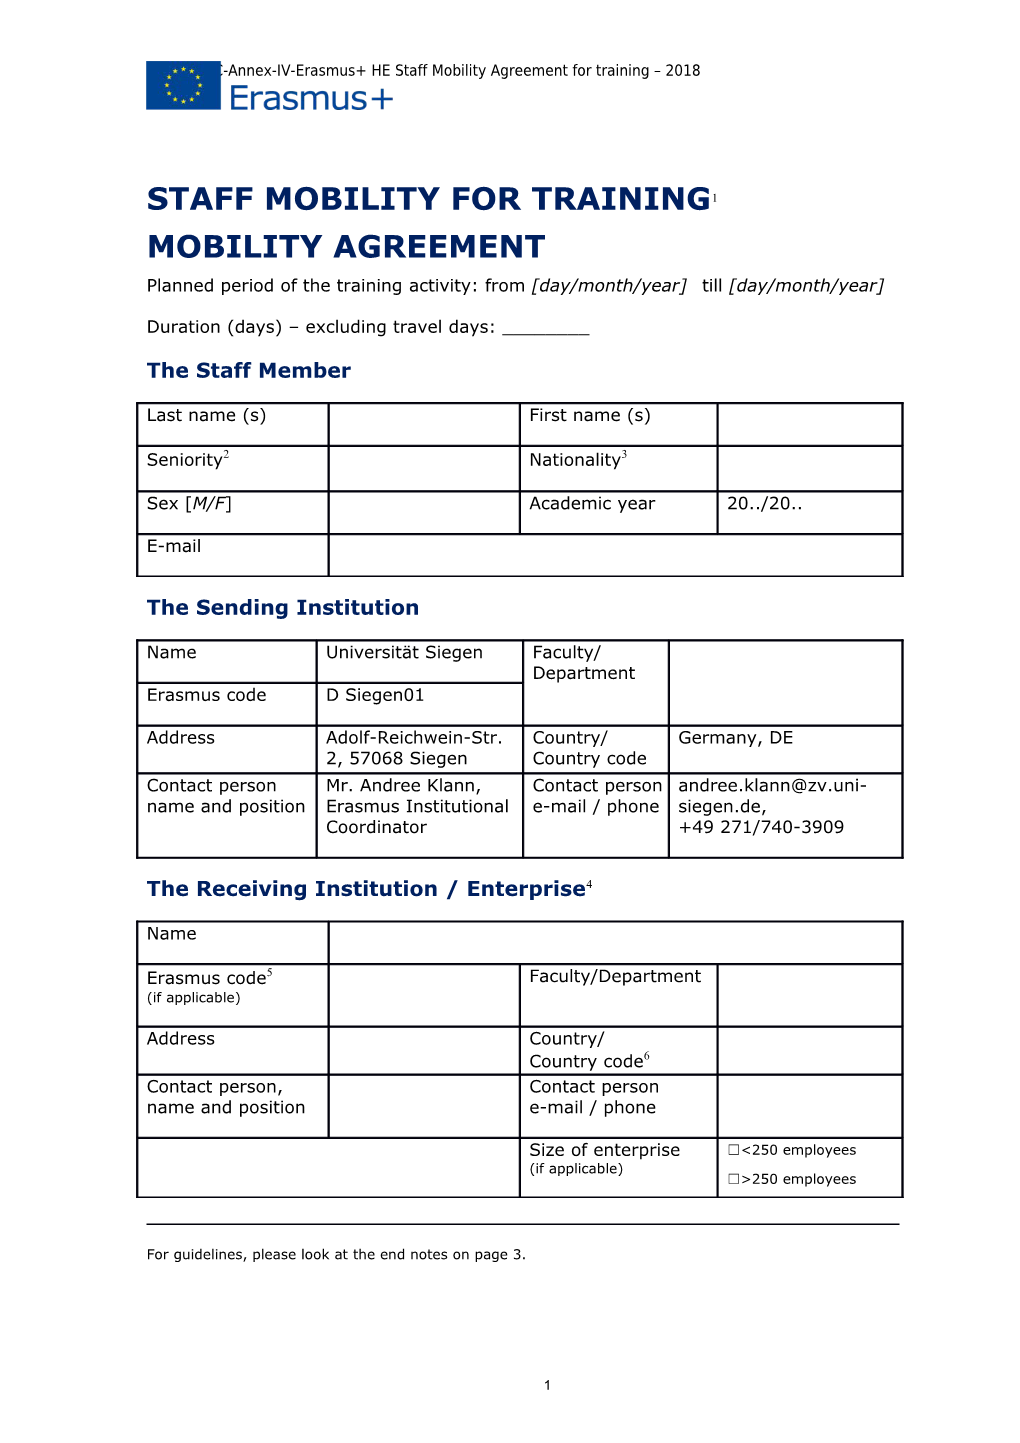 Gfna-II.7-C-Annex-IV-Erasmus+ HE Staff Mobility Agreement for Training 2018